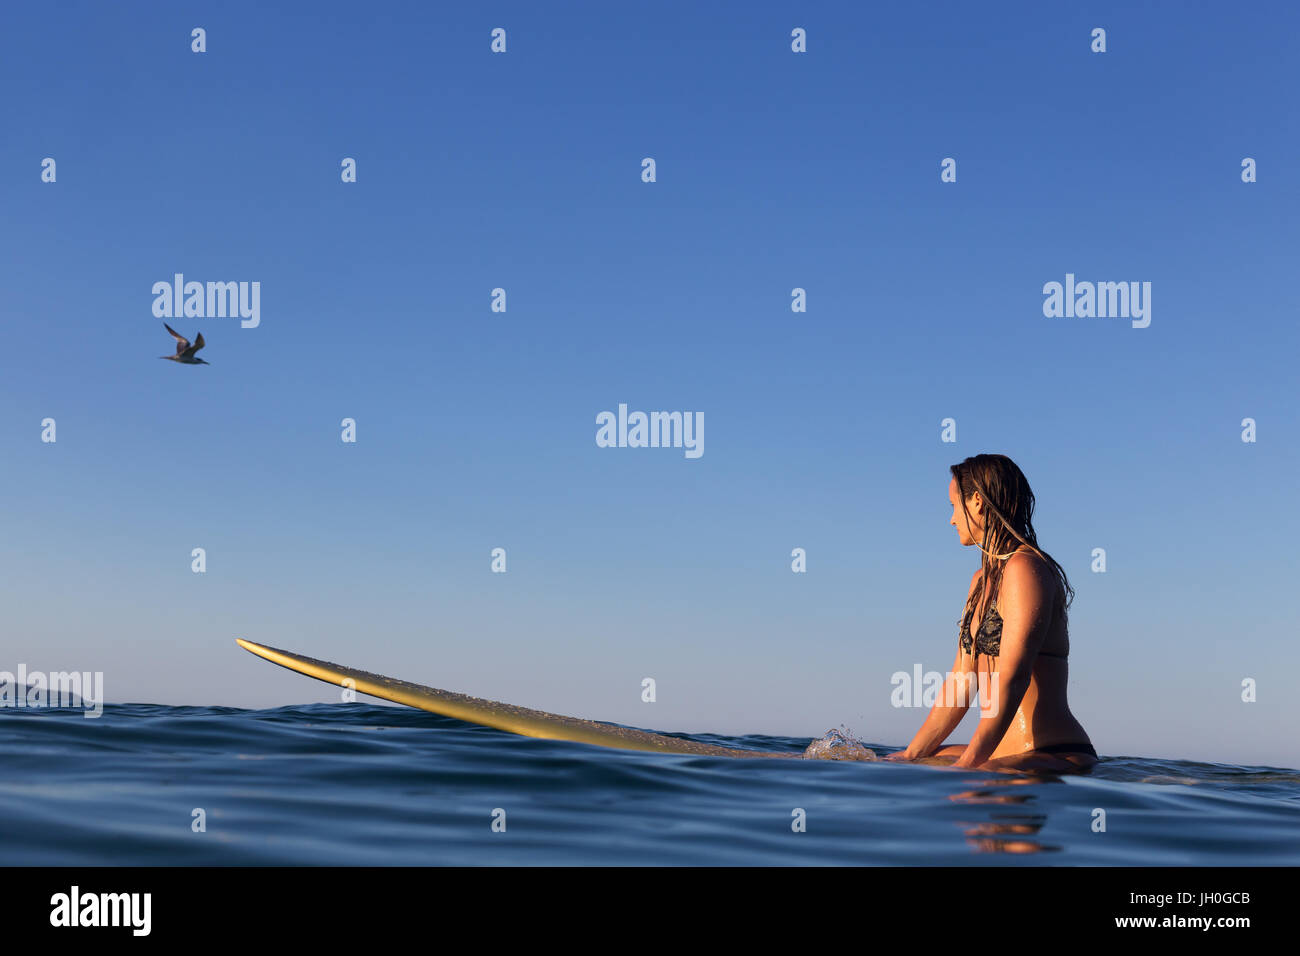 A female surfer sits on her surfboard in a calm ocean and watches as a sea bird flies by. Stock Photo